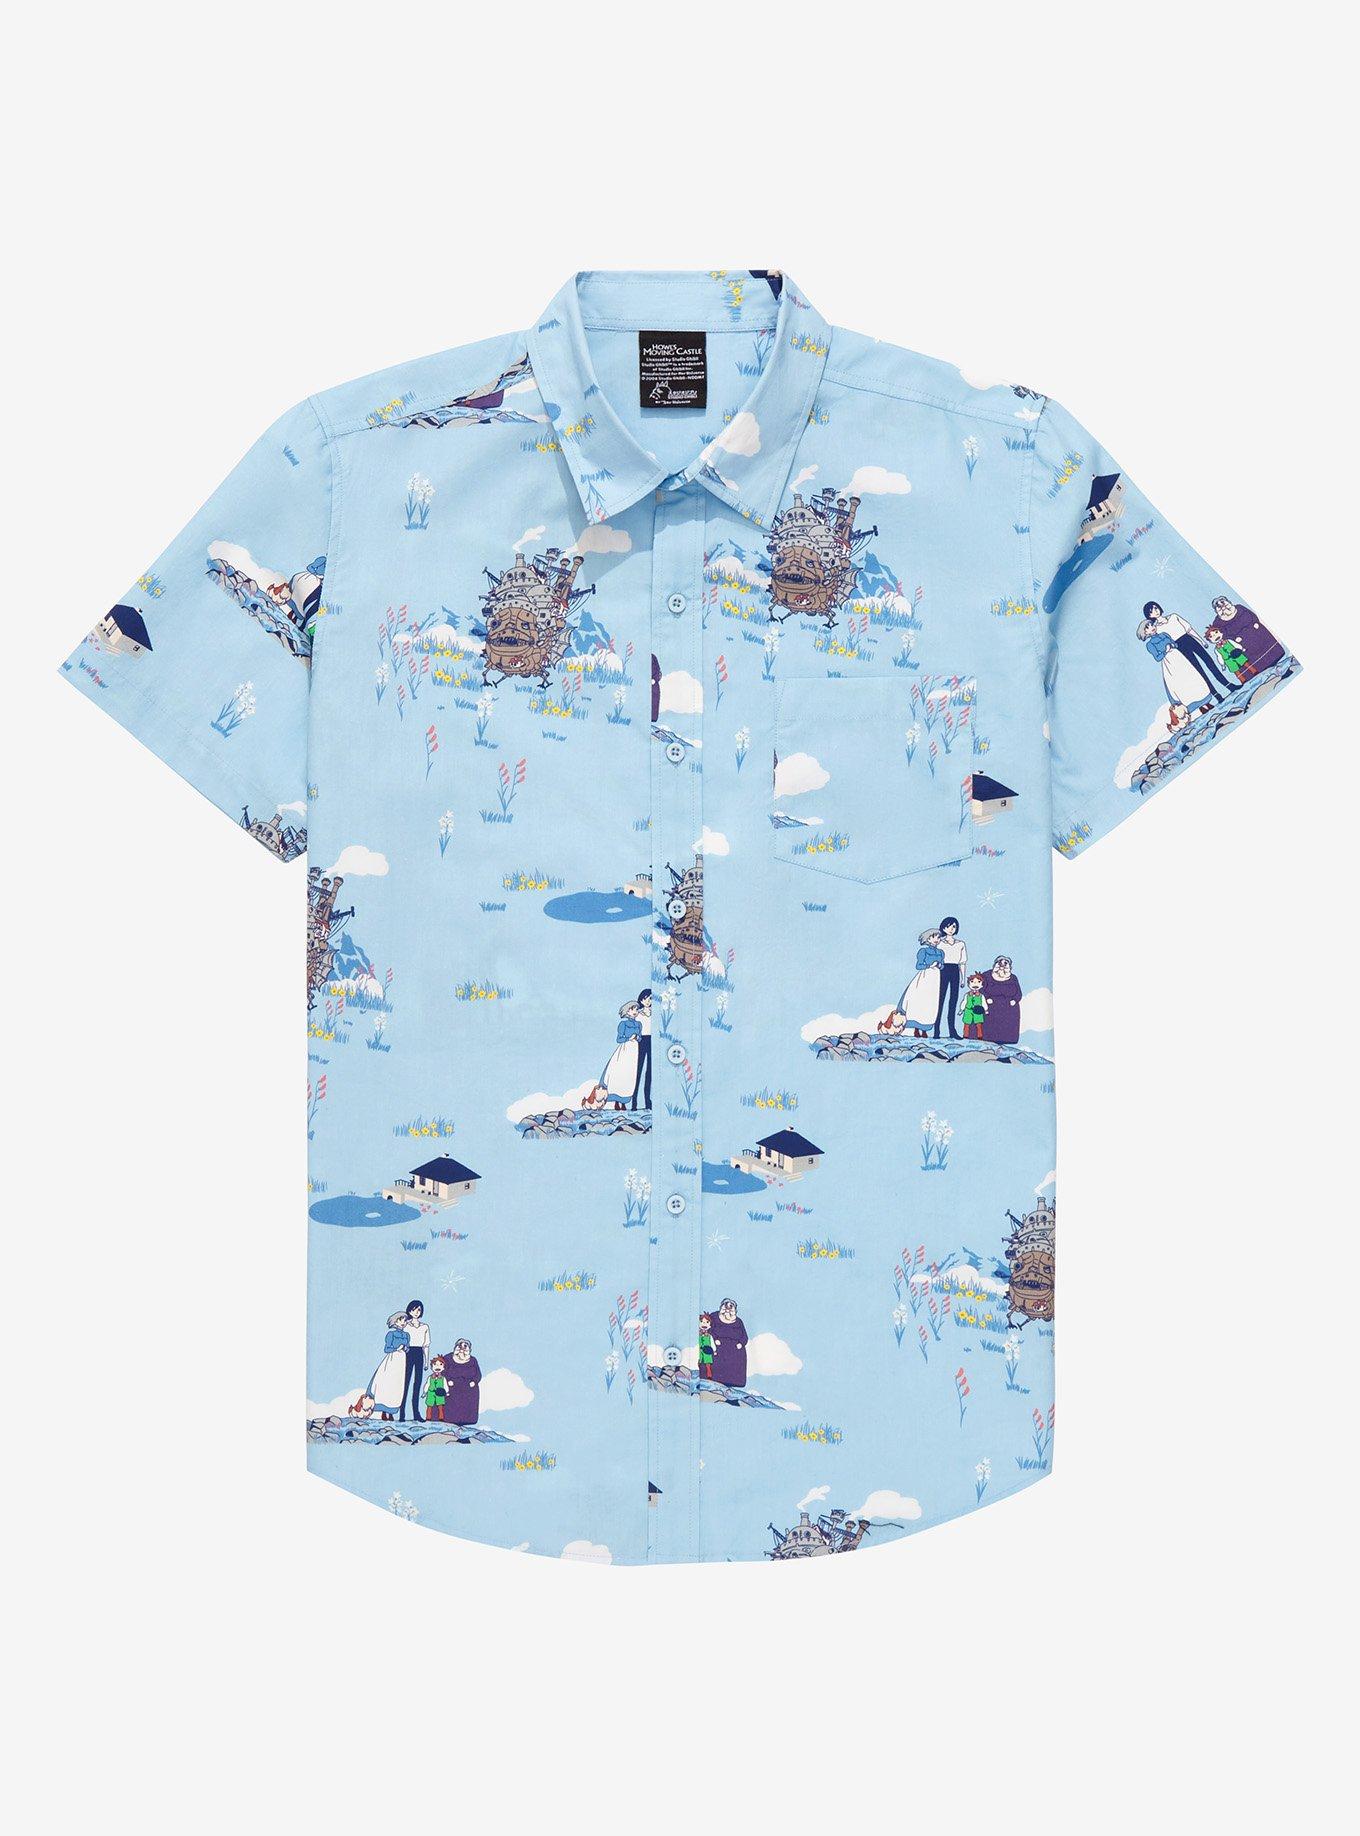 Studio Ghibli Howl’s Moving Castle Scenic Woven Button-Up - BoxLunch Exclusive , LIGHT BLUE, hi-res